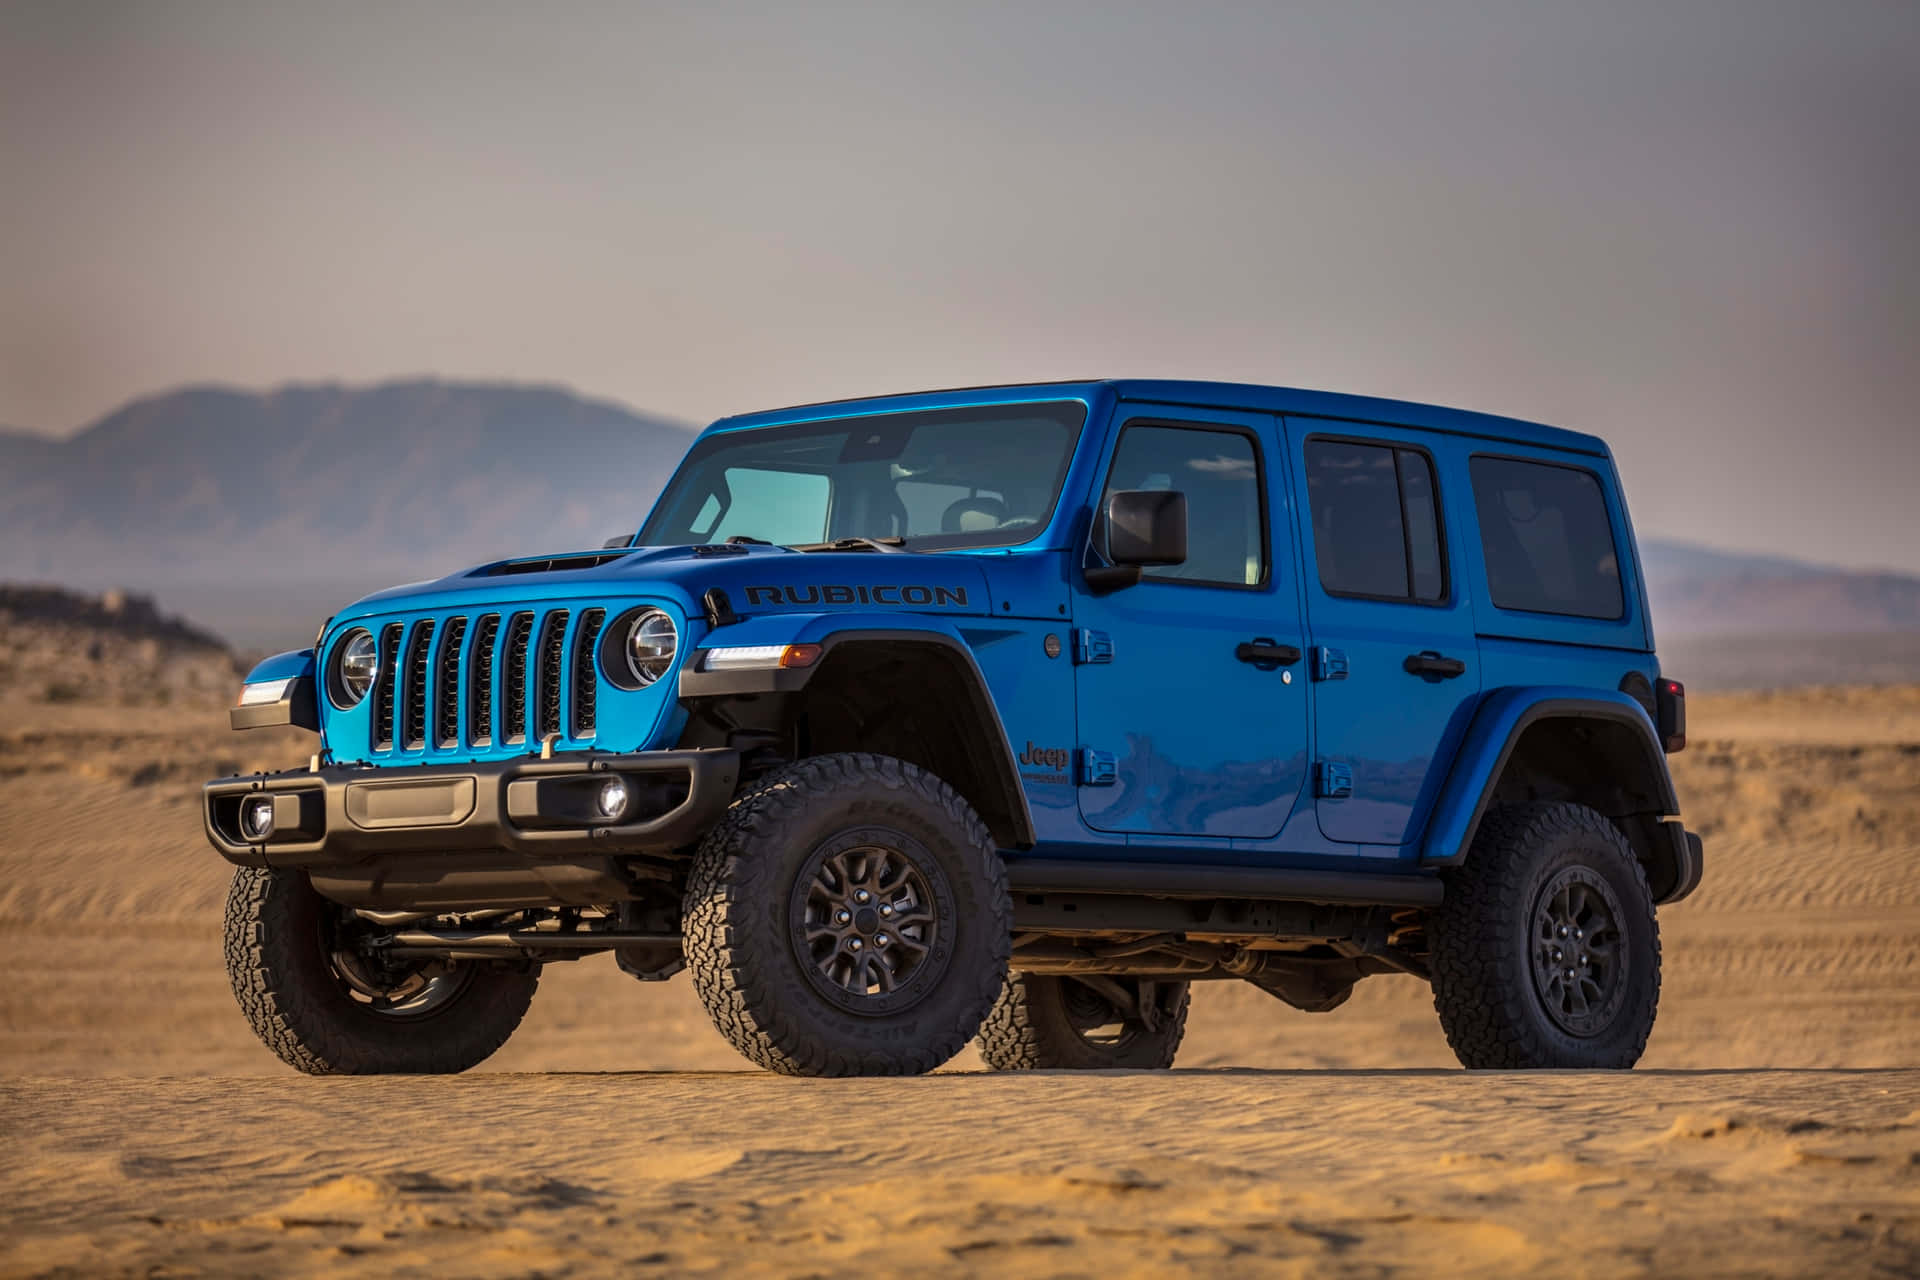 A Blue Jeep Wrangler Is Parked In The Desert